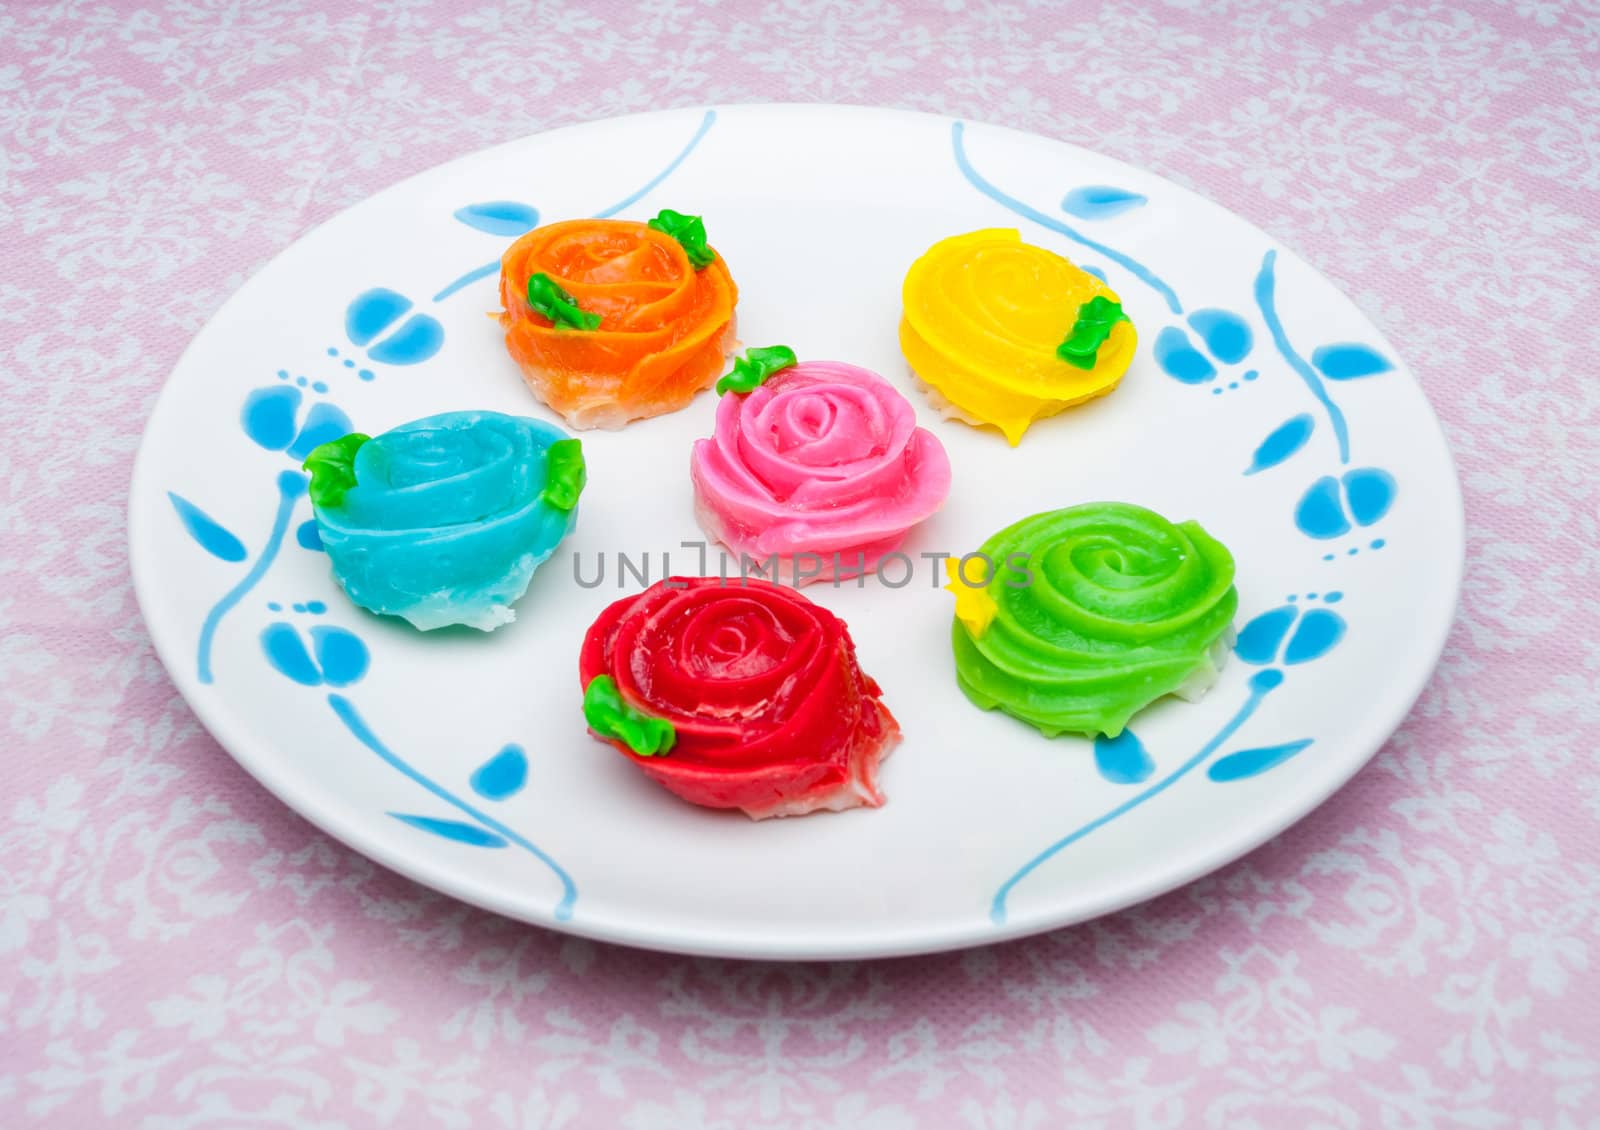 Aa-Lua or Crispy Sticky Dumpling is made from wheat flour, coconut cream, and sugar. This dessert is crispy outside but soft inside, sweet, creamy, and scented. It can be colored by natural colors and food coloring.